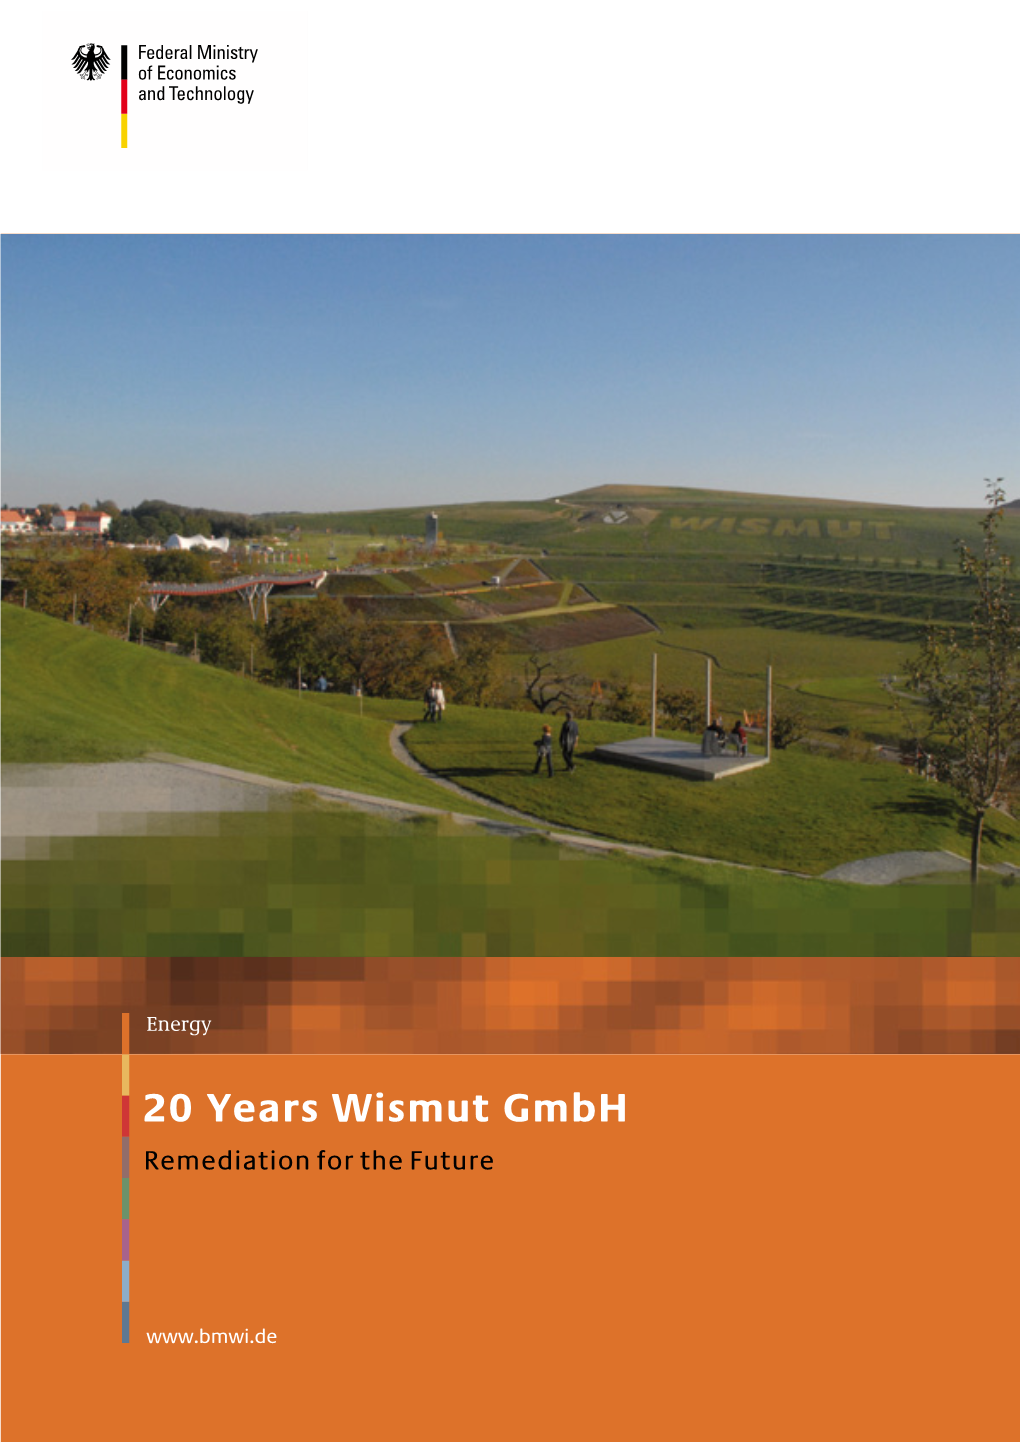 20 Years Wismut Gmbh 20 Jahre Wismut Gmbh Remediation for the Future